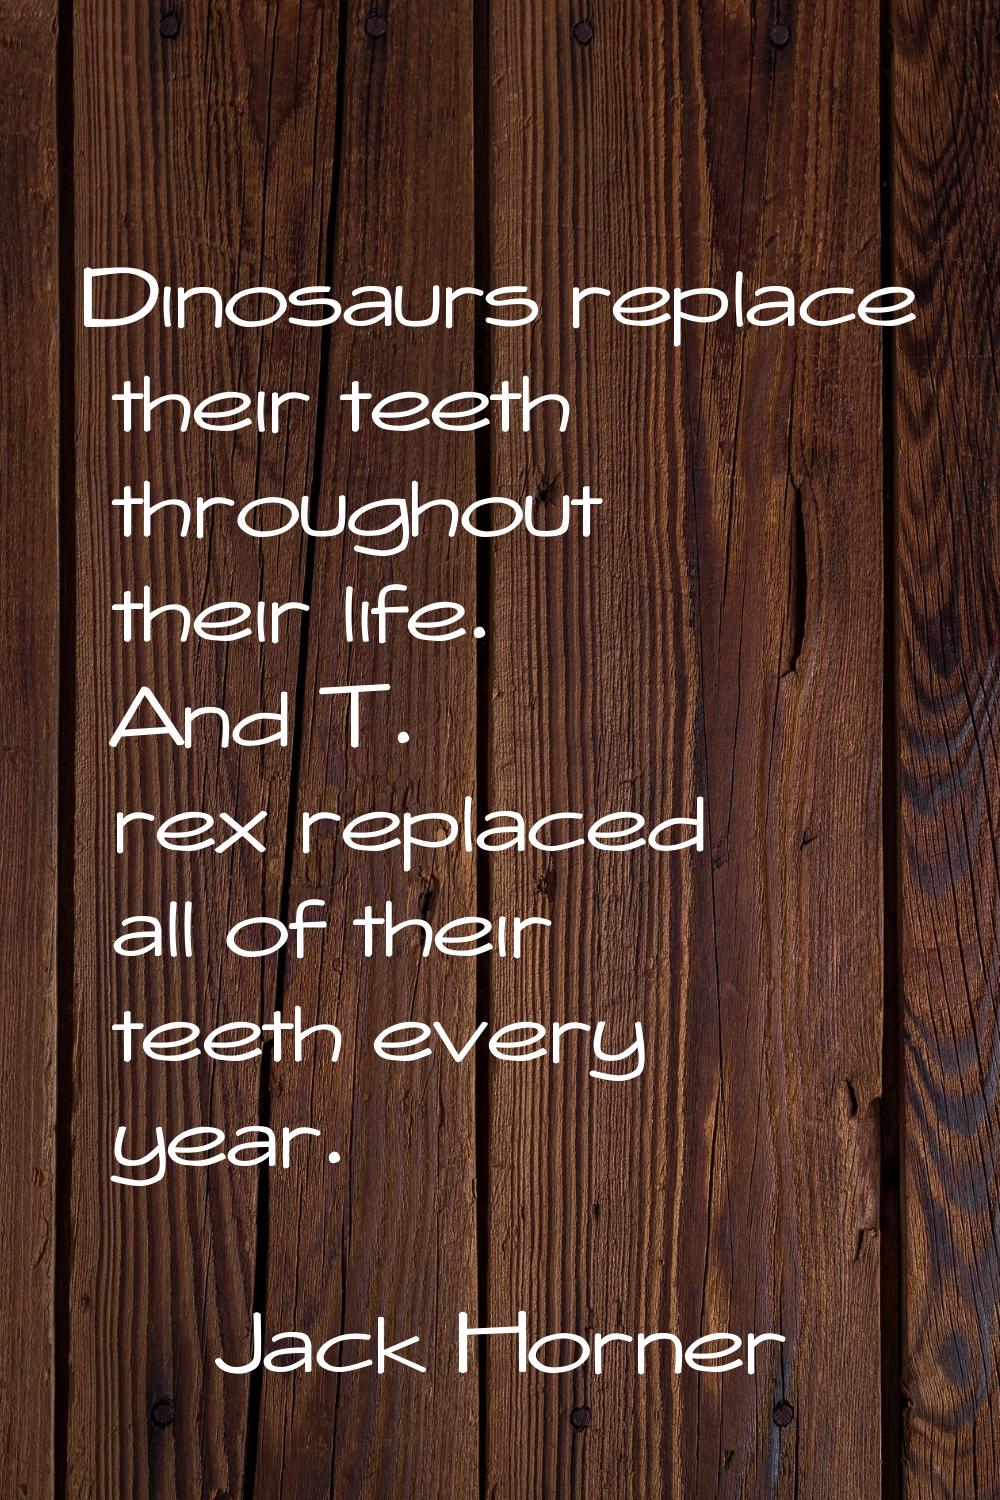 Dinosaurs replace their teeth throughout their life. And T. rex replaced all of their teeth every y